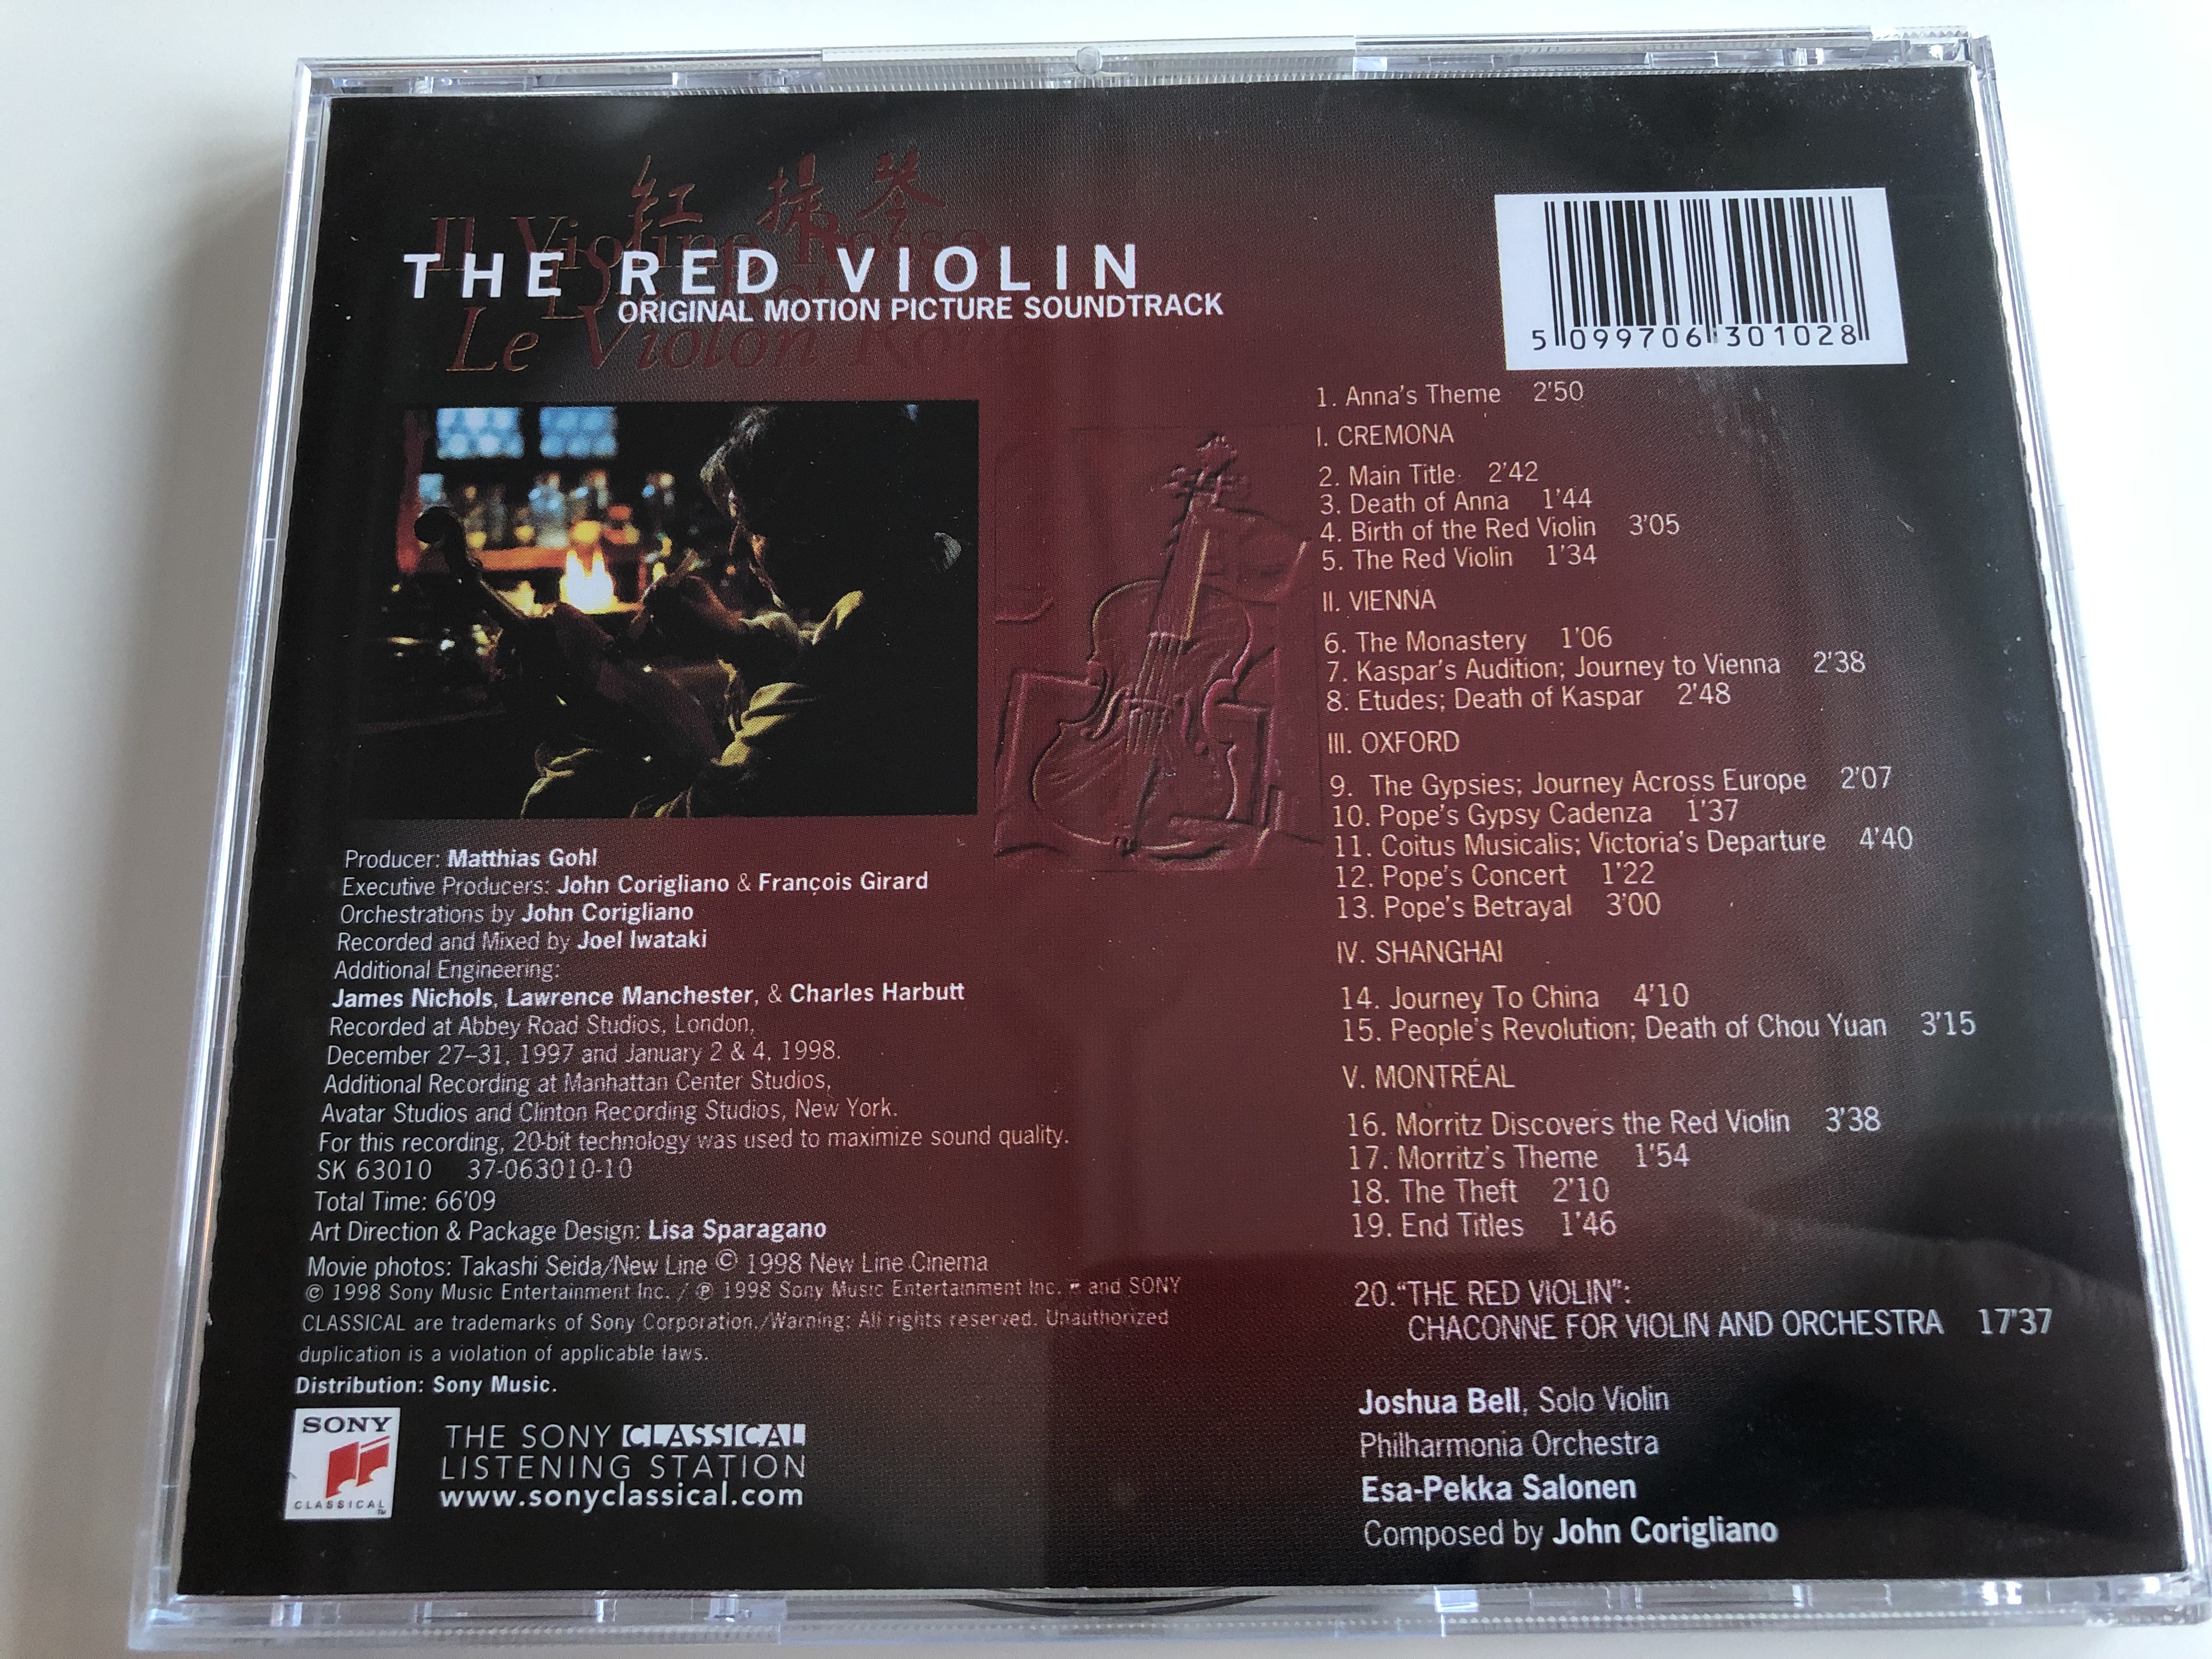 original-motion-picture-soundtrack-the-red-violin-a-film-by-francois-girard-music-composed-by-john-corigliano-joshua-bell-solo-violin-philharmonia-orchestra-conducted-by-esa-pekka-salone-8-.jpg